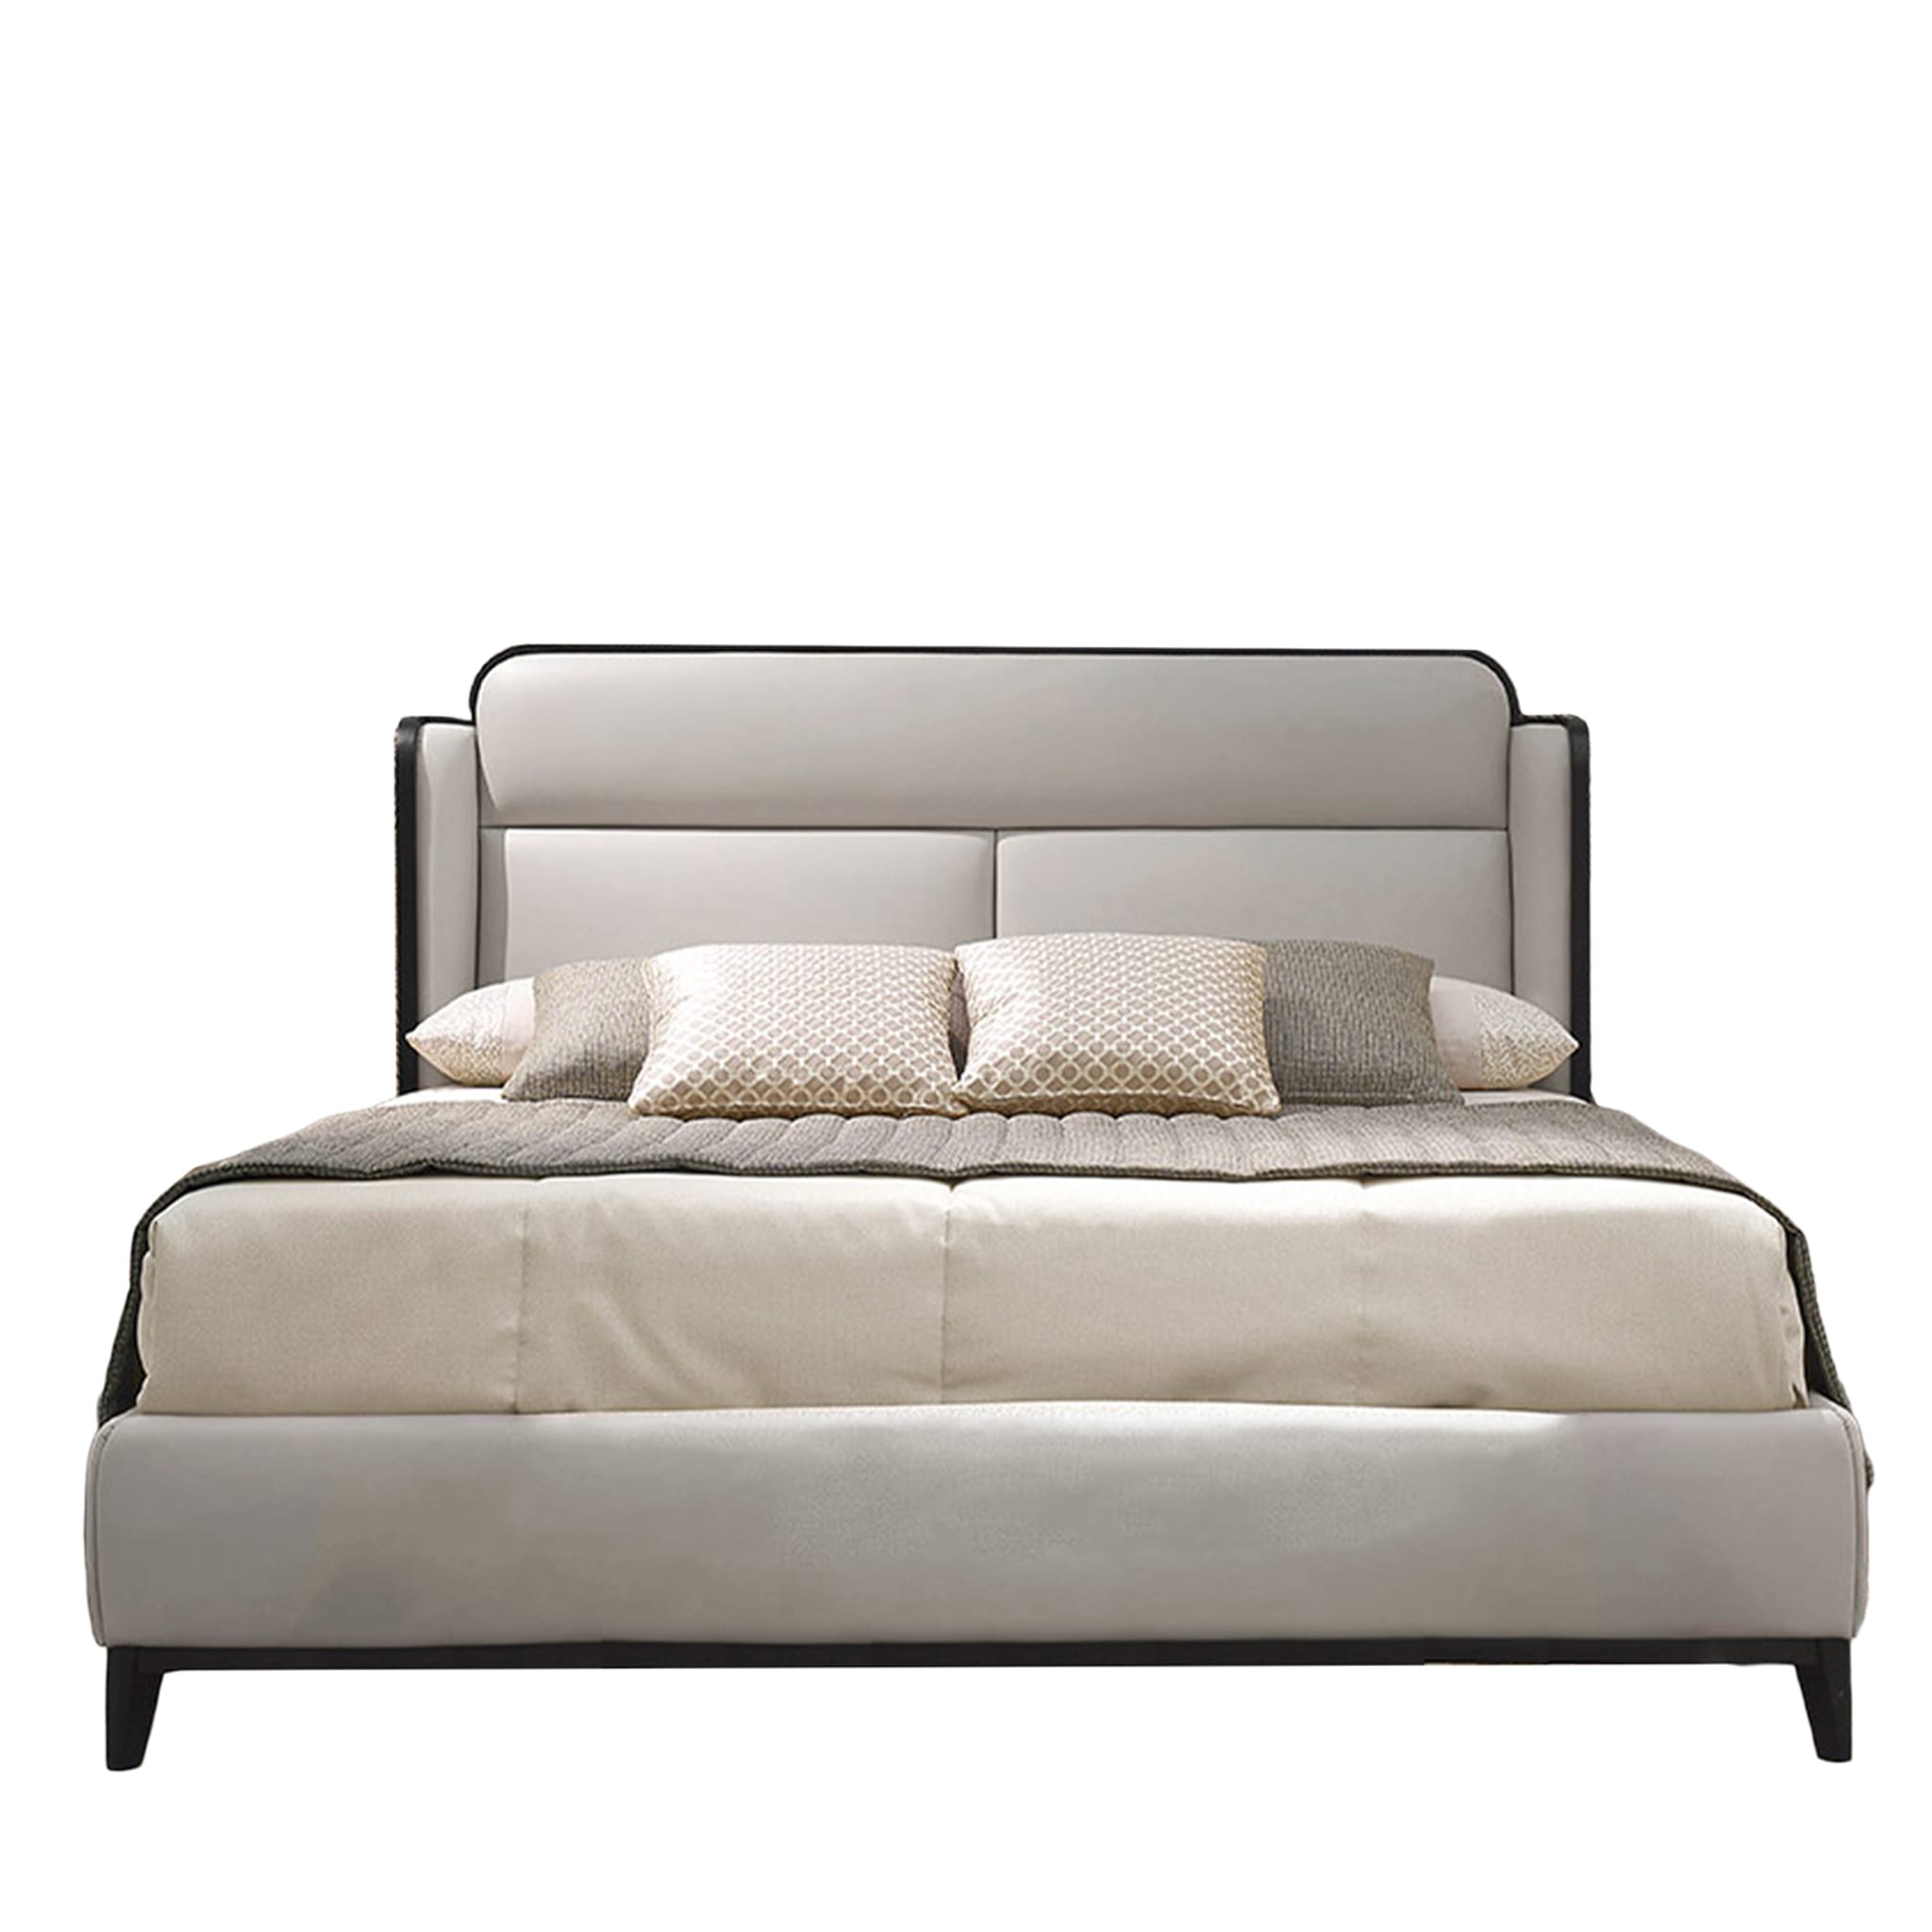 Grey Leather Bed - Main view